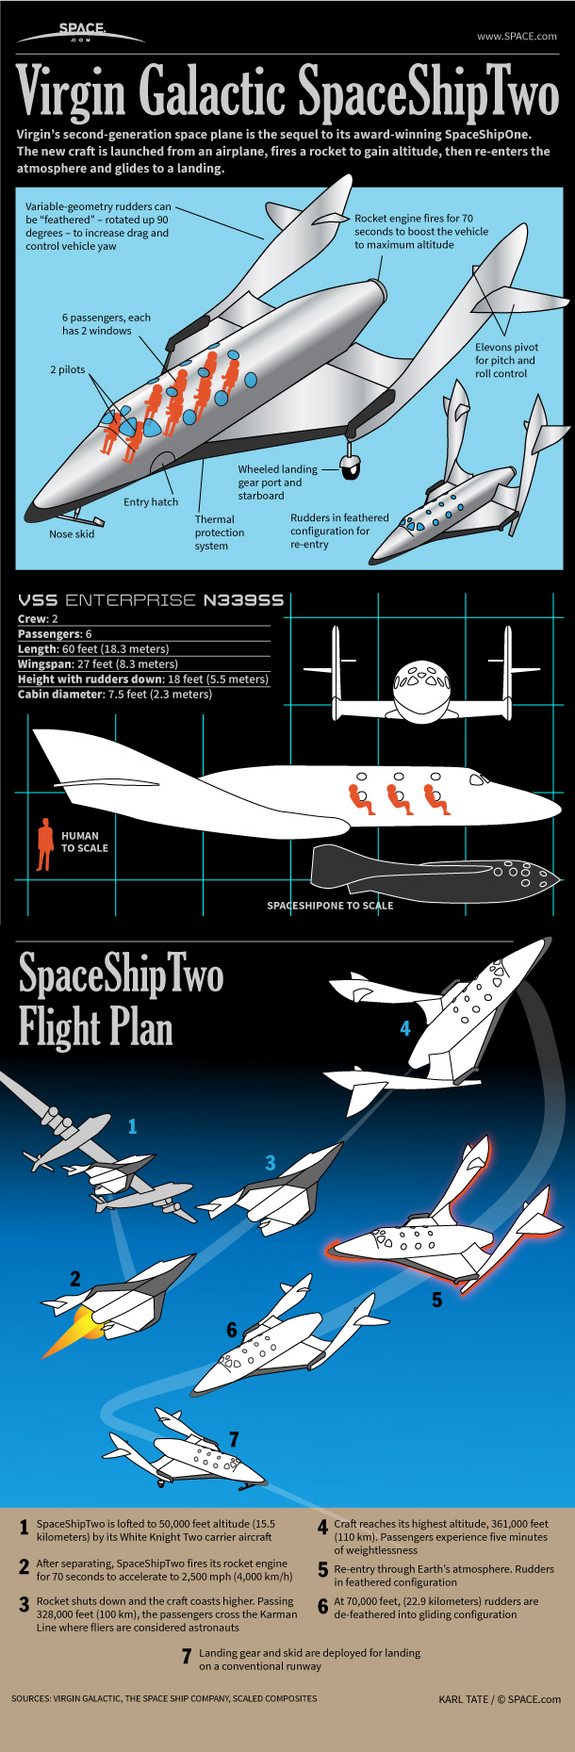 Find out how Virgin Galactic's SpaceShipTwo passenger space plane works, in this SPACE.com infographic.